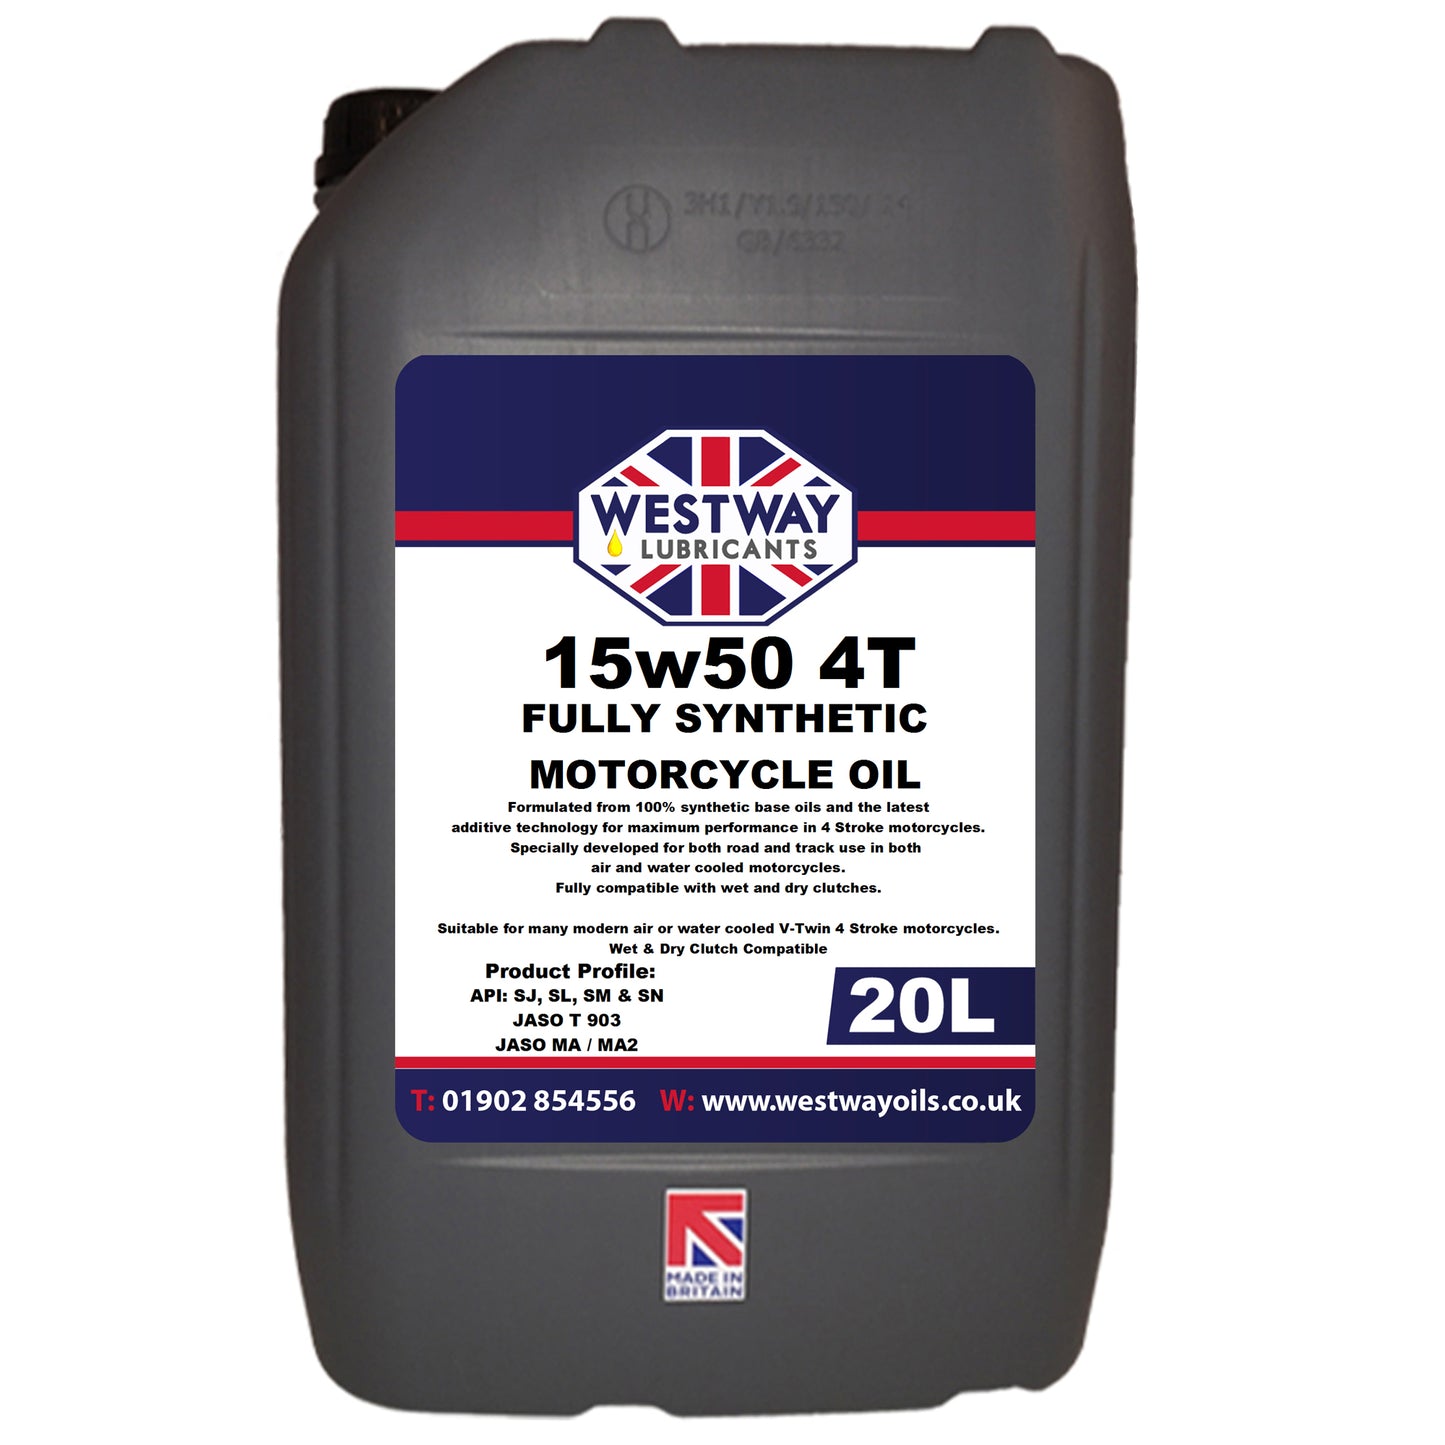 15w50 4T Fully Synthetic Motorcycle Oil